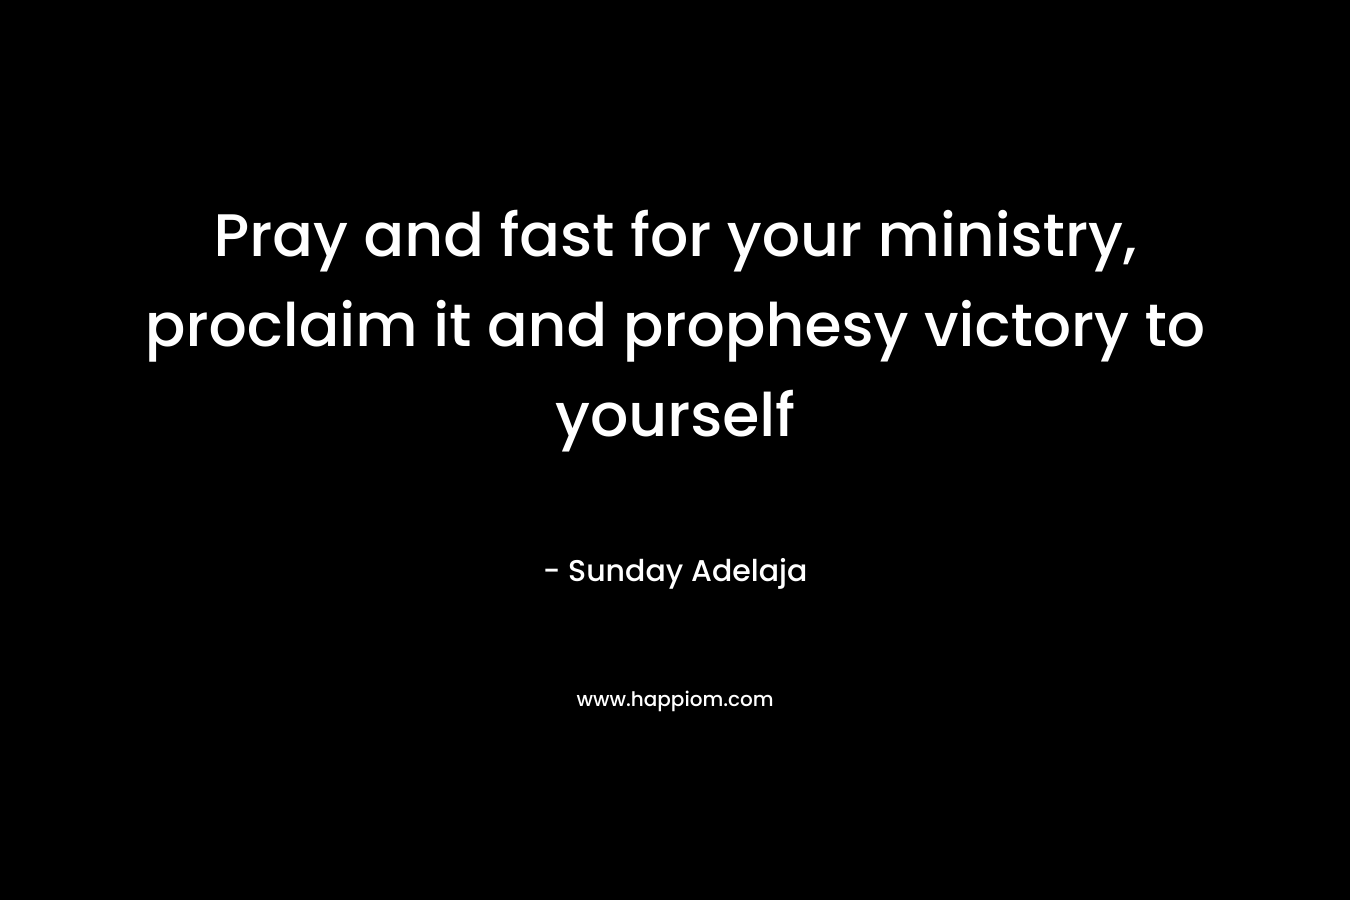 Pray and fast for your ministry, proclaim it and prophesy victory to yourself – Sunday Adelaja